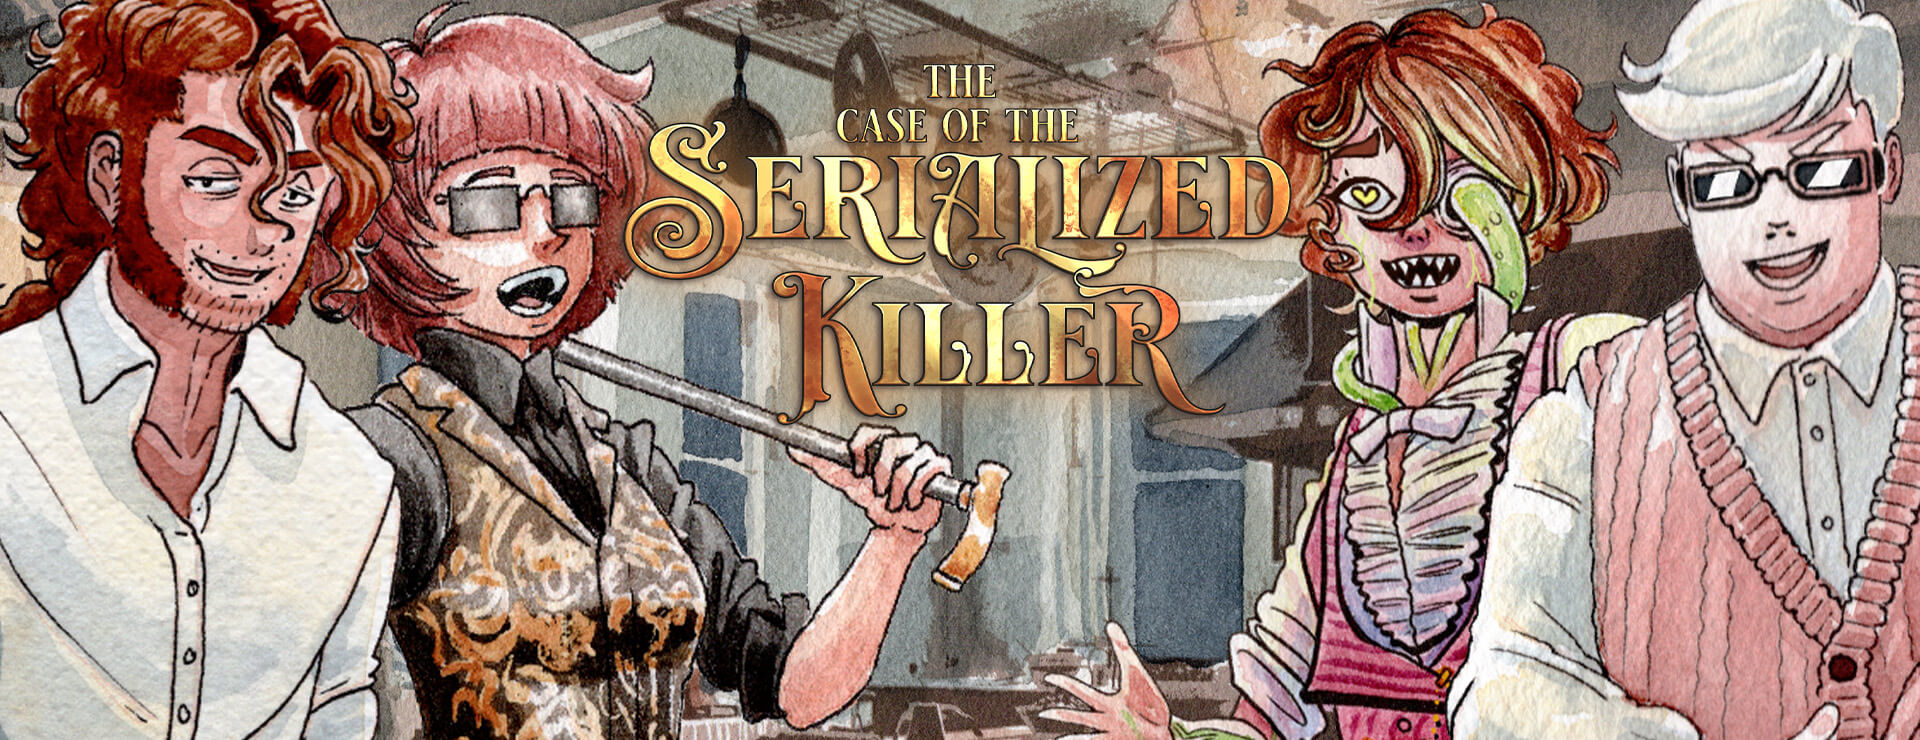 The Case of the Serialized Killer - ビジュアルノベル ゲーム